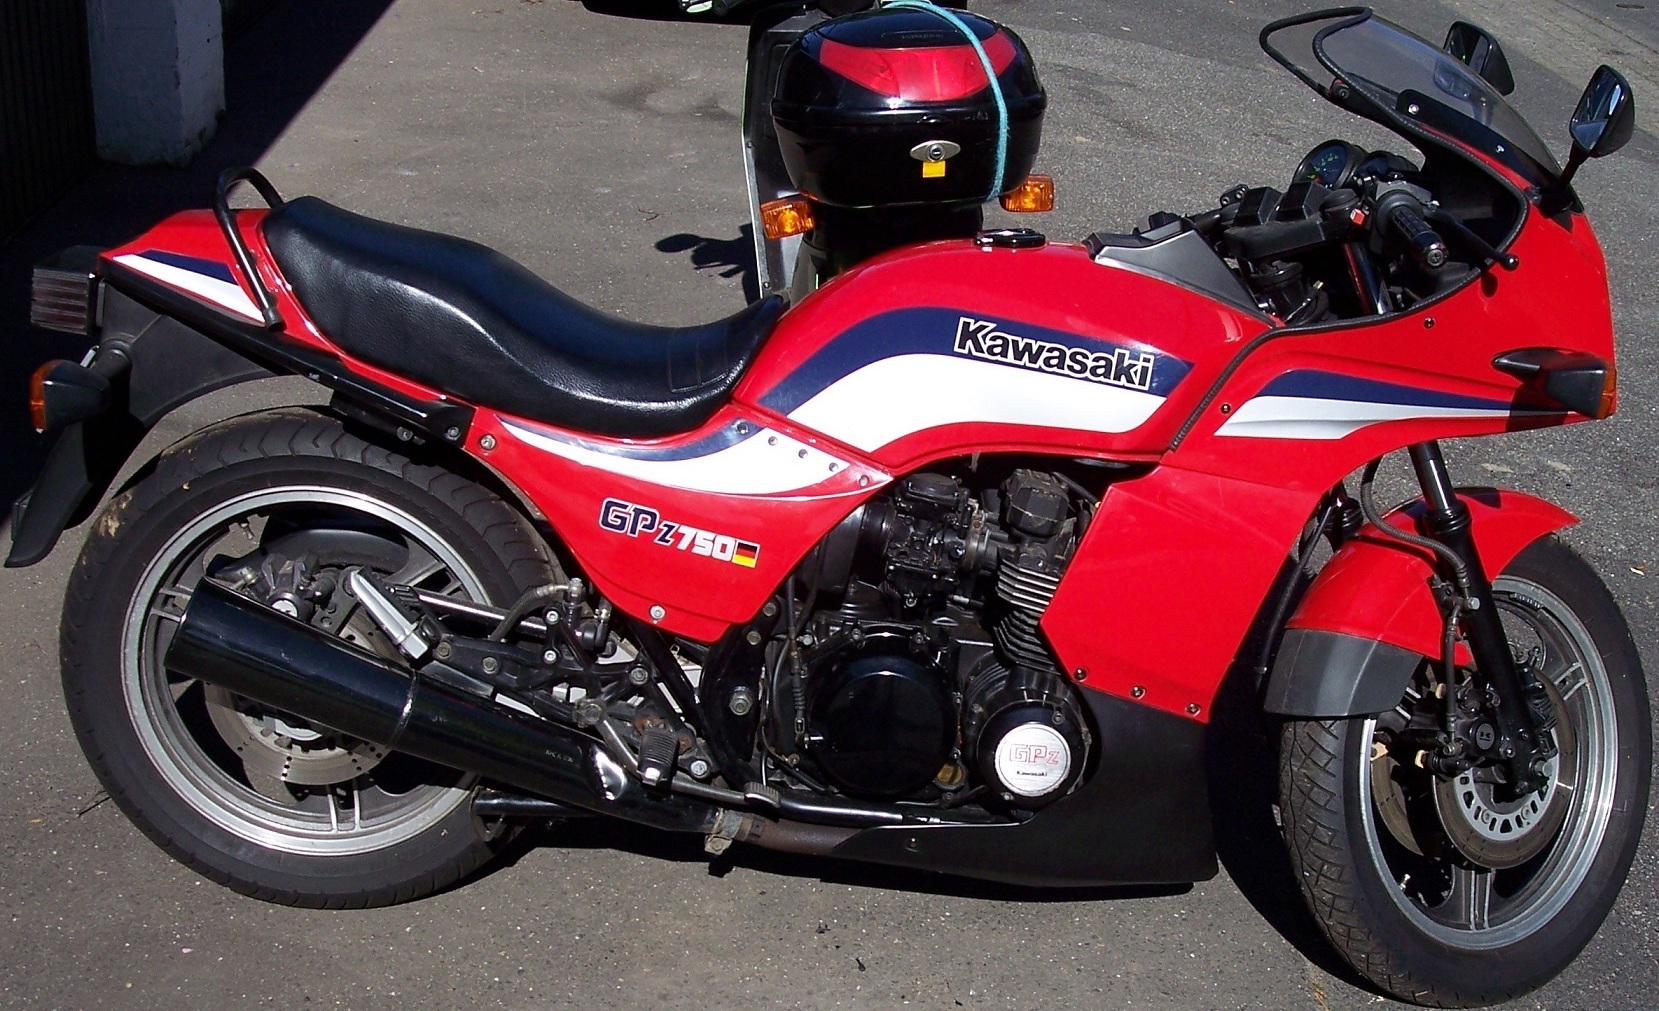 GPZ750 in Movies